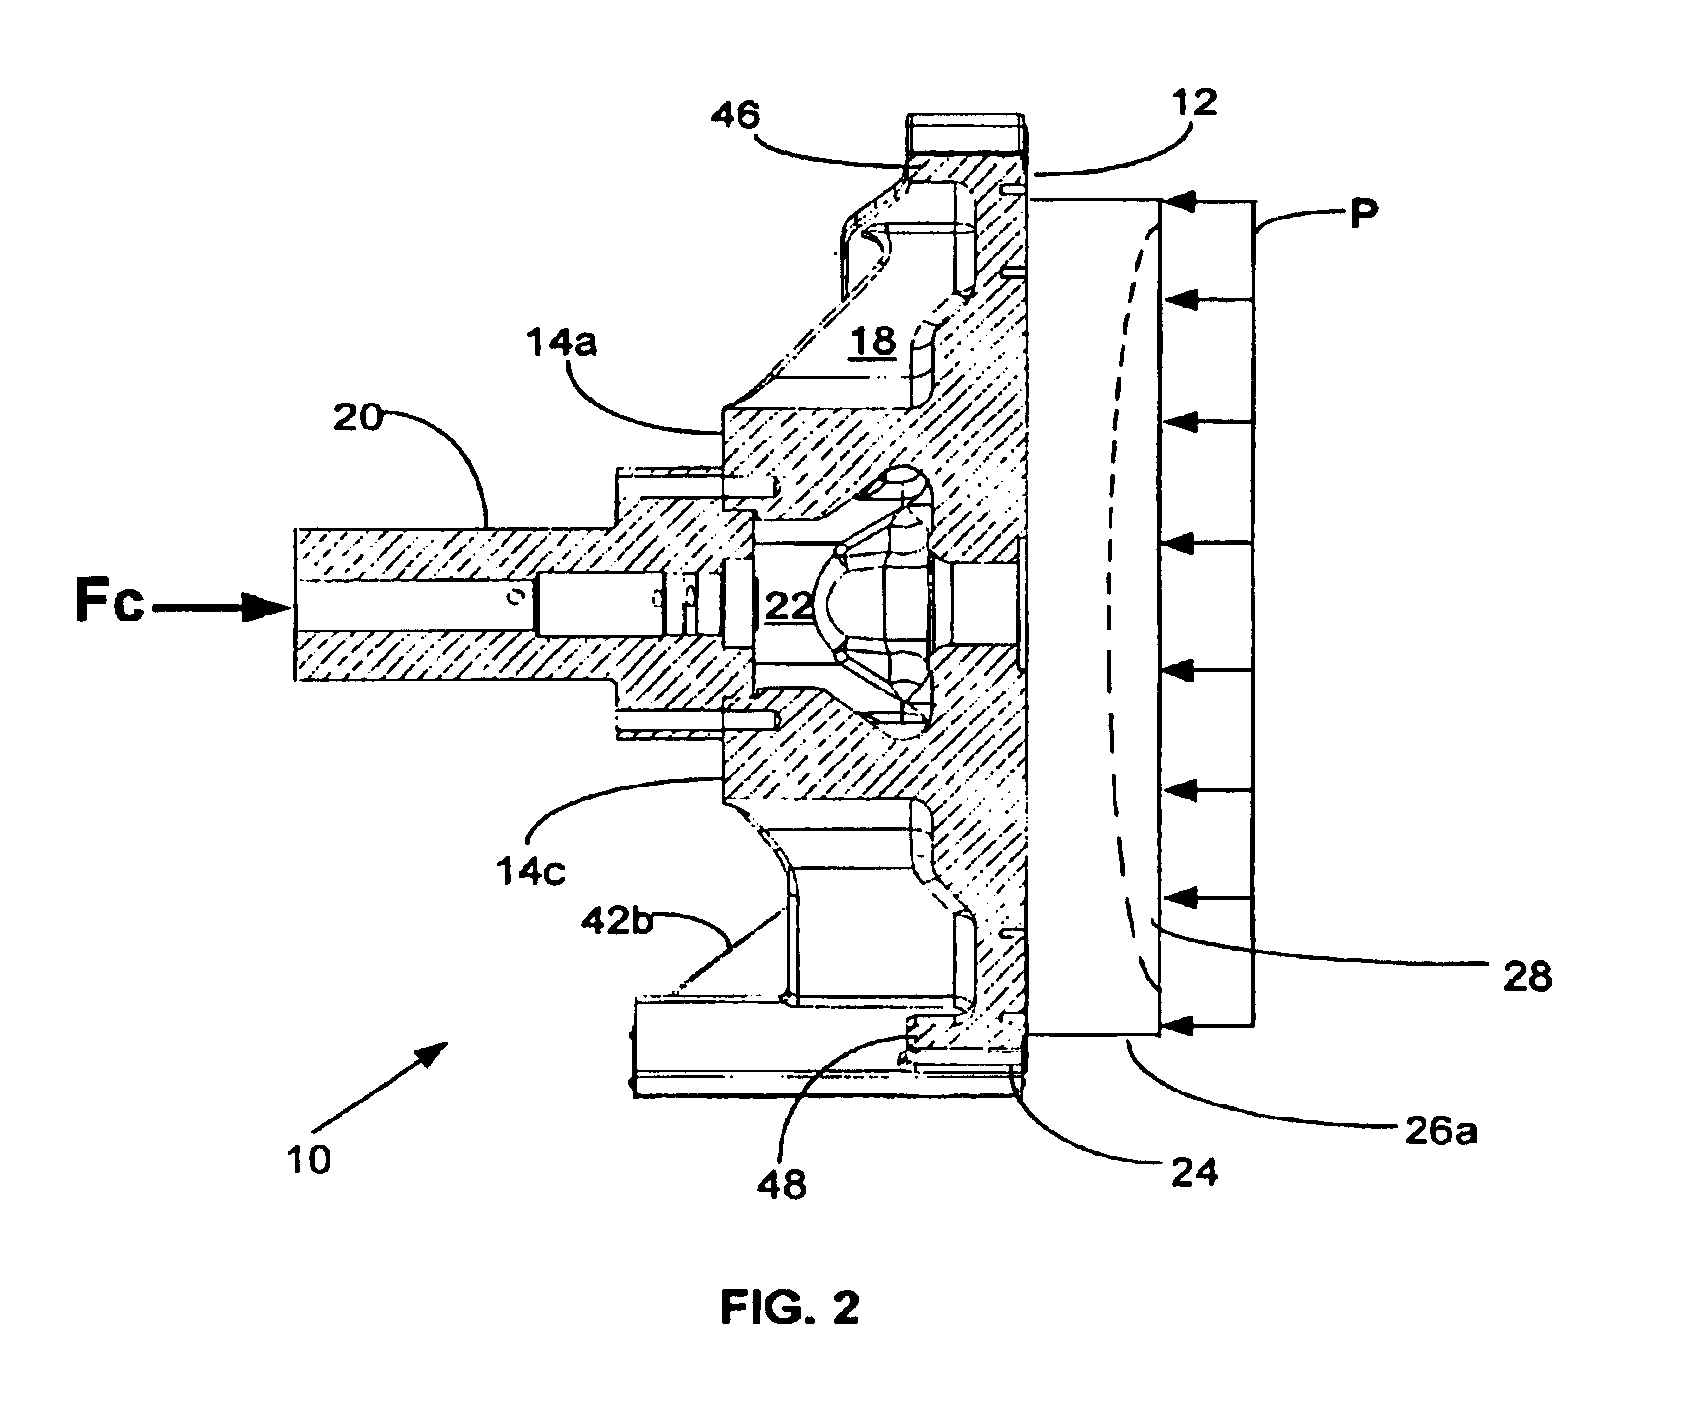 Injection molding machine having a platen for uniform distribution of clamping forces